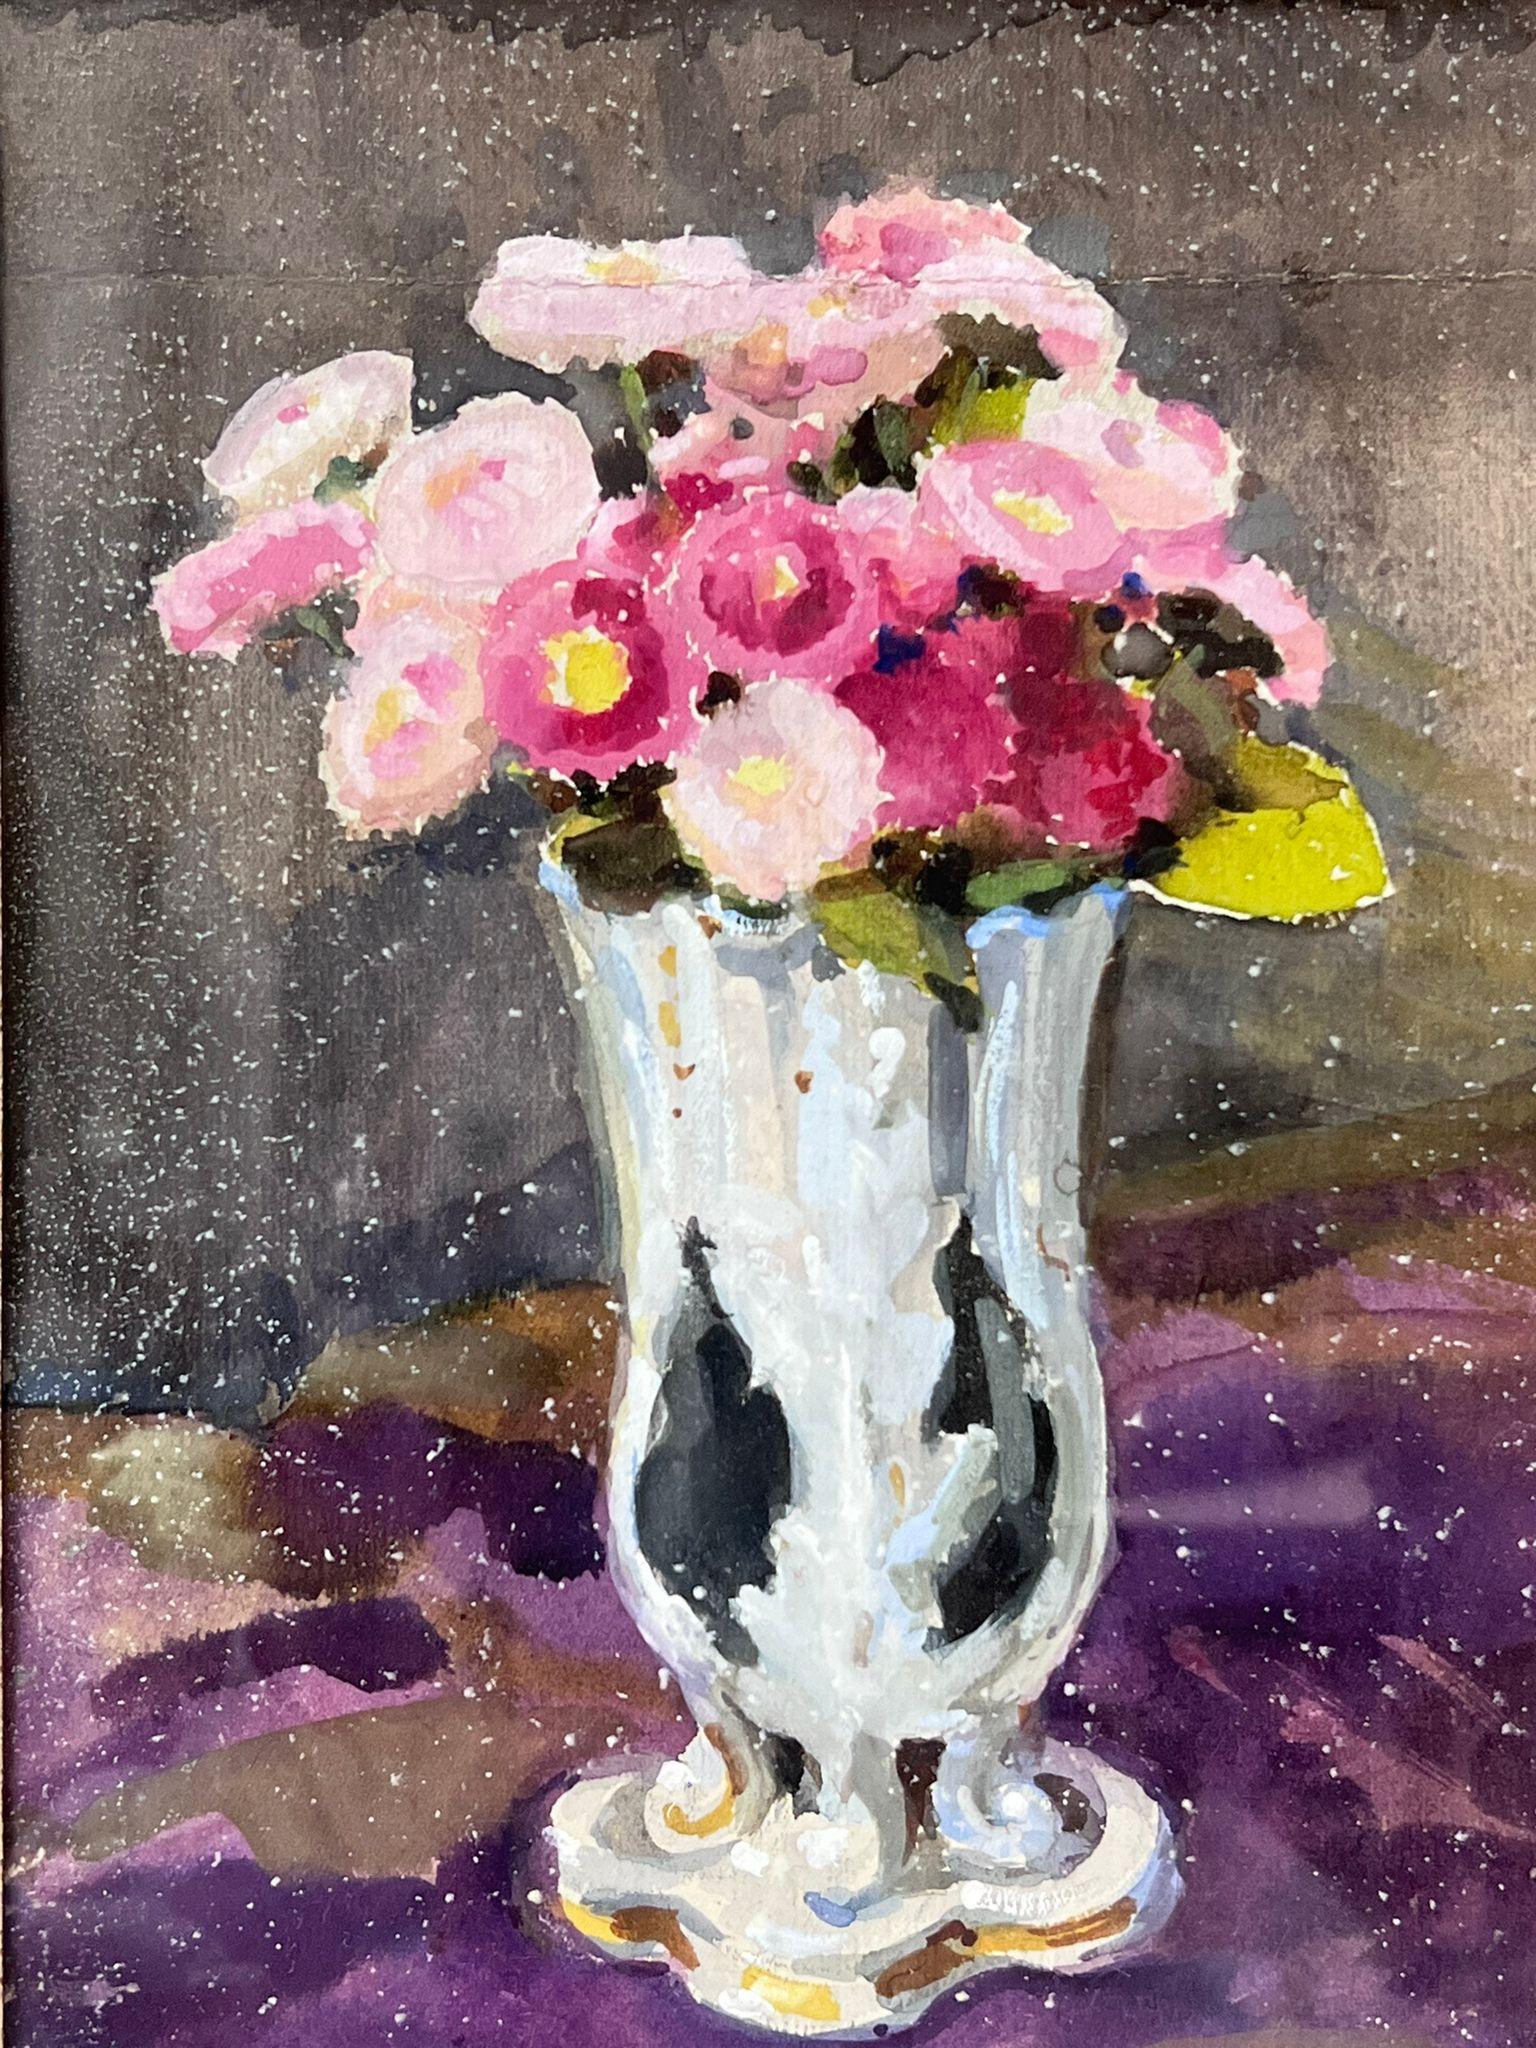 Flowers In Vase
signed by Louise Alix, French 1950's Impressionist 
watercolour on artist paper stuck on board, framed. Glass covered
frame: 12.5 x 9.75 inches
painting: 11 x 8 inches
provenance: from a large private collection of this artists work